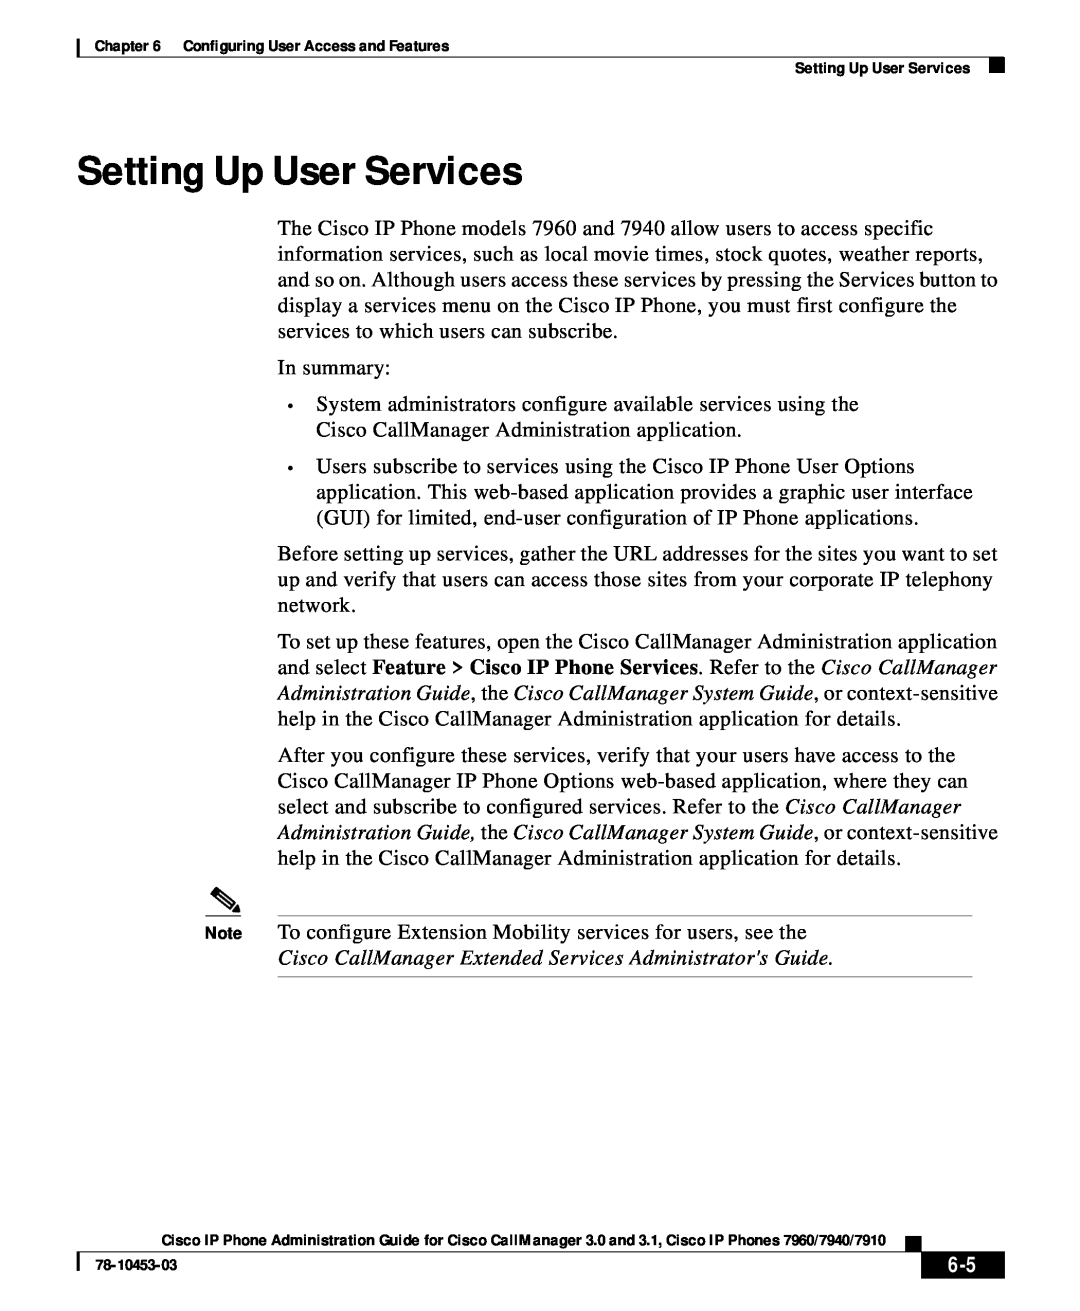 Cisco Systems 7910 user service Setting Up User Services, Cisco CallManager Extended Services Administrators Guide 